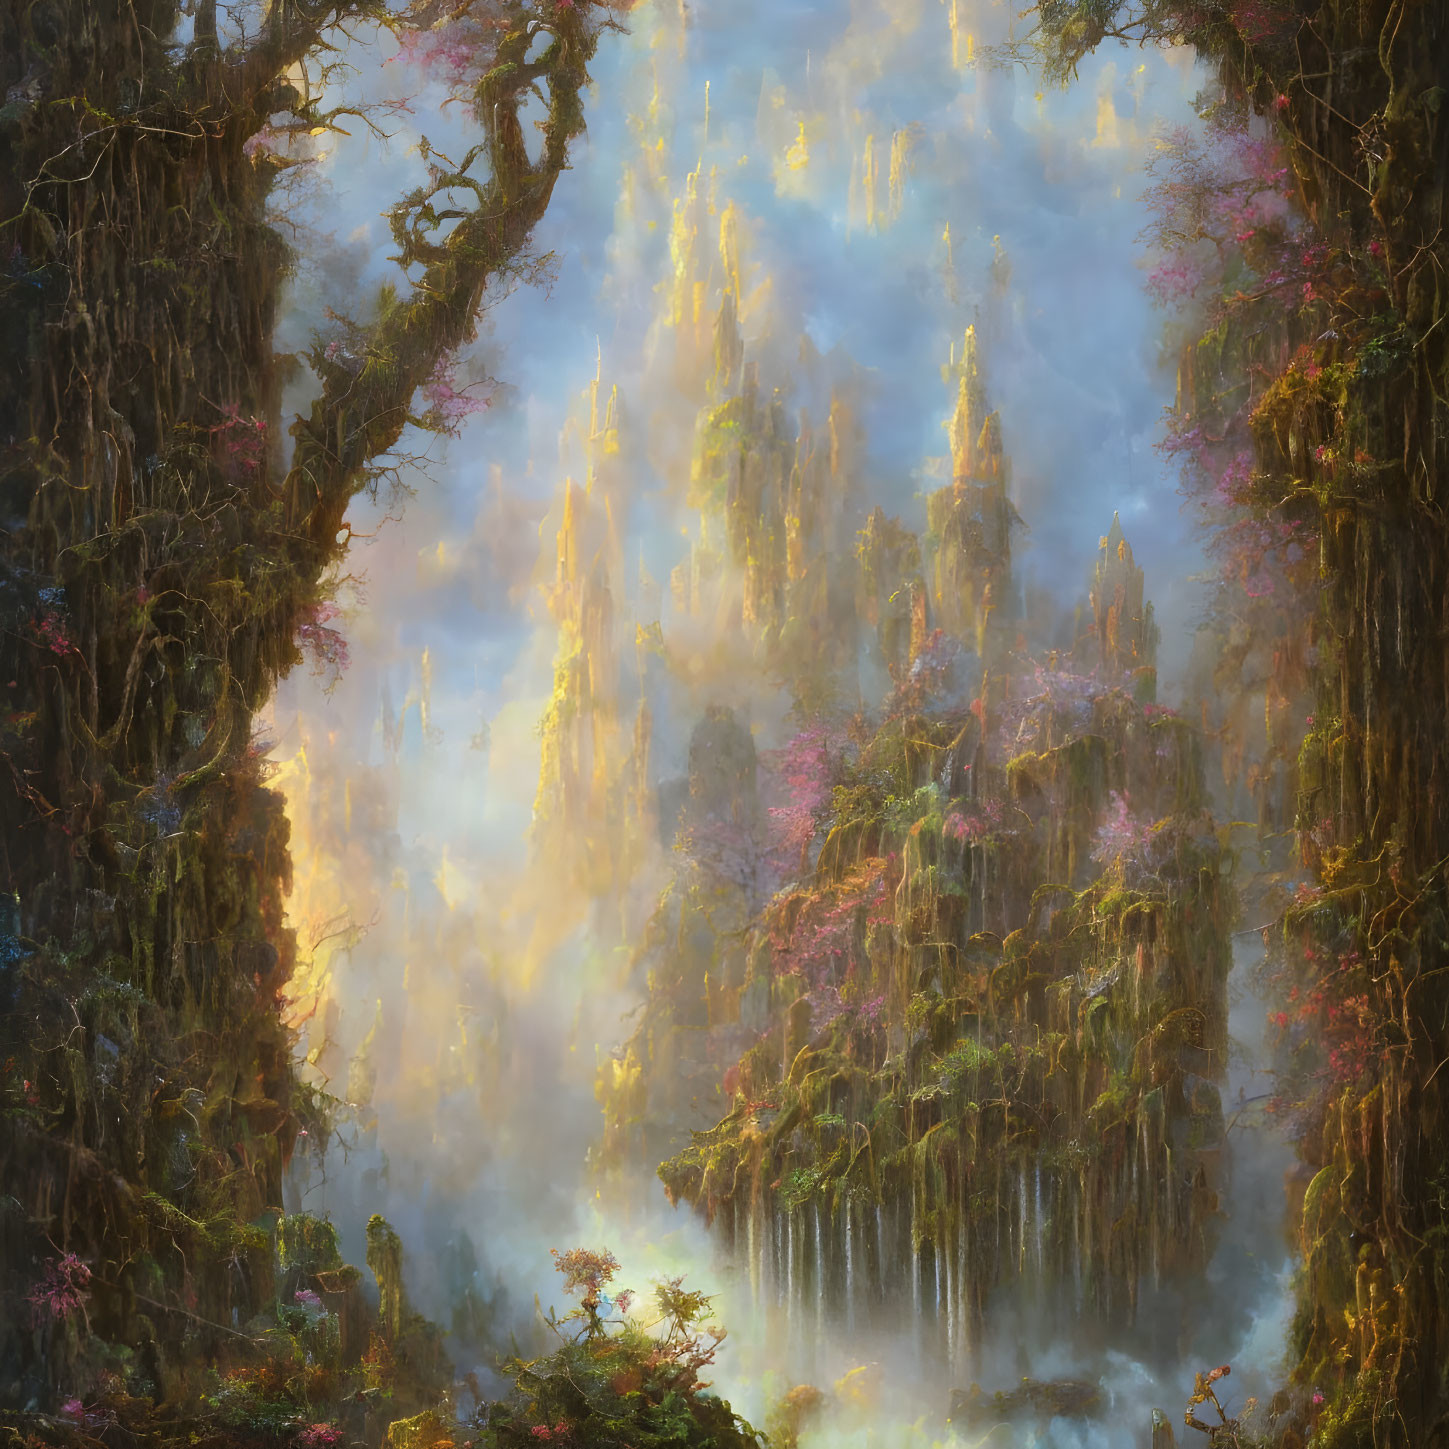 Enchanting forest scene with fog, sunlight, moss, and flowers